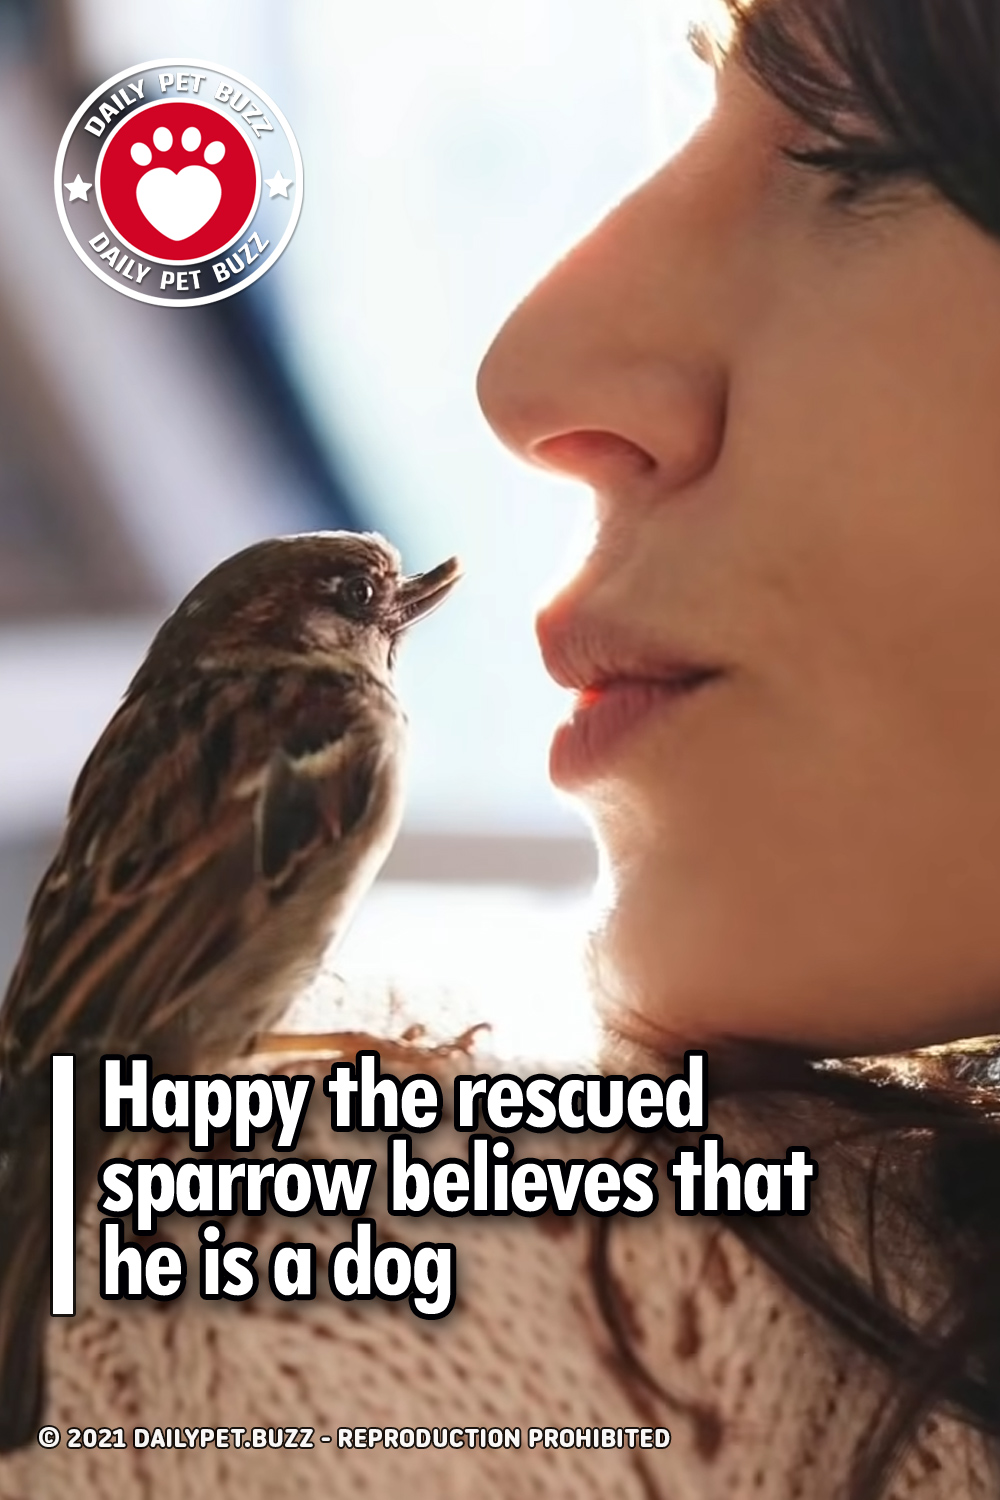 Happy the rescued sparrow believes that he is a dog